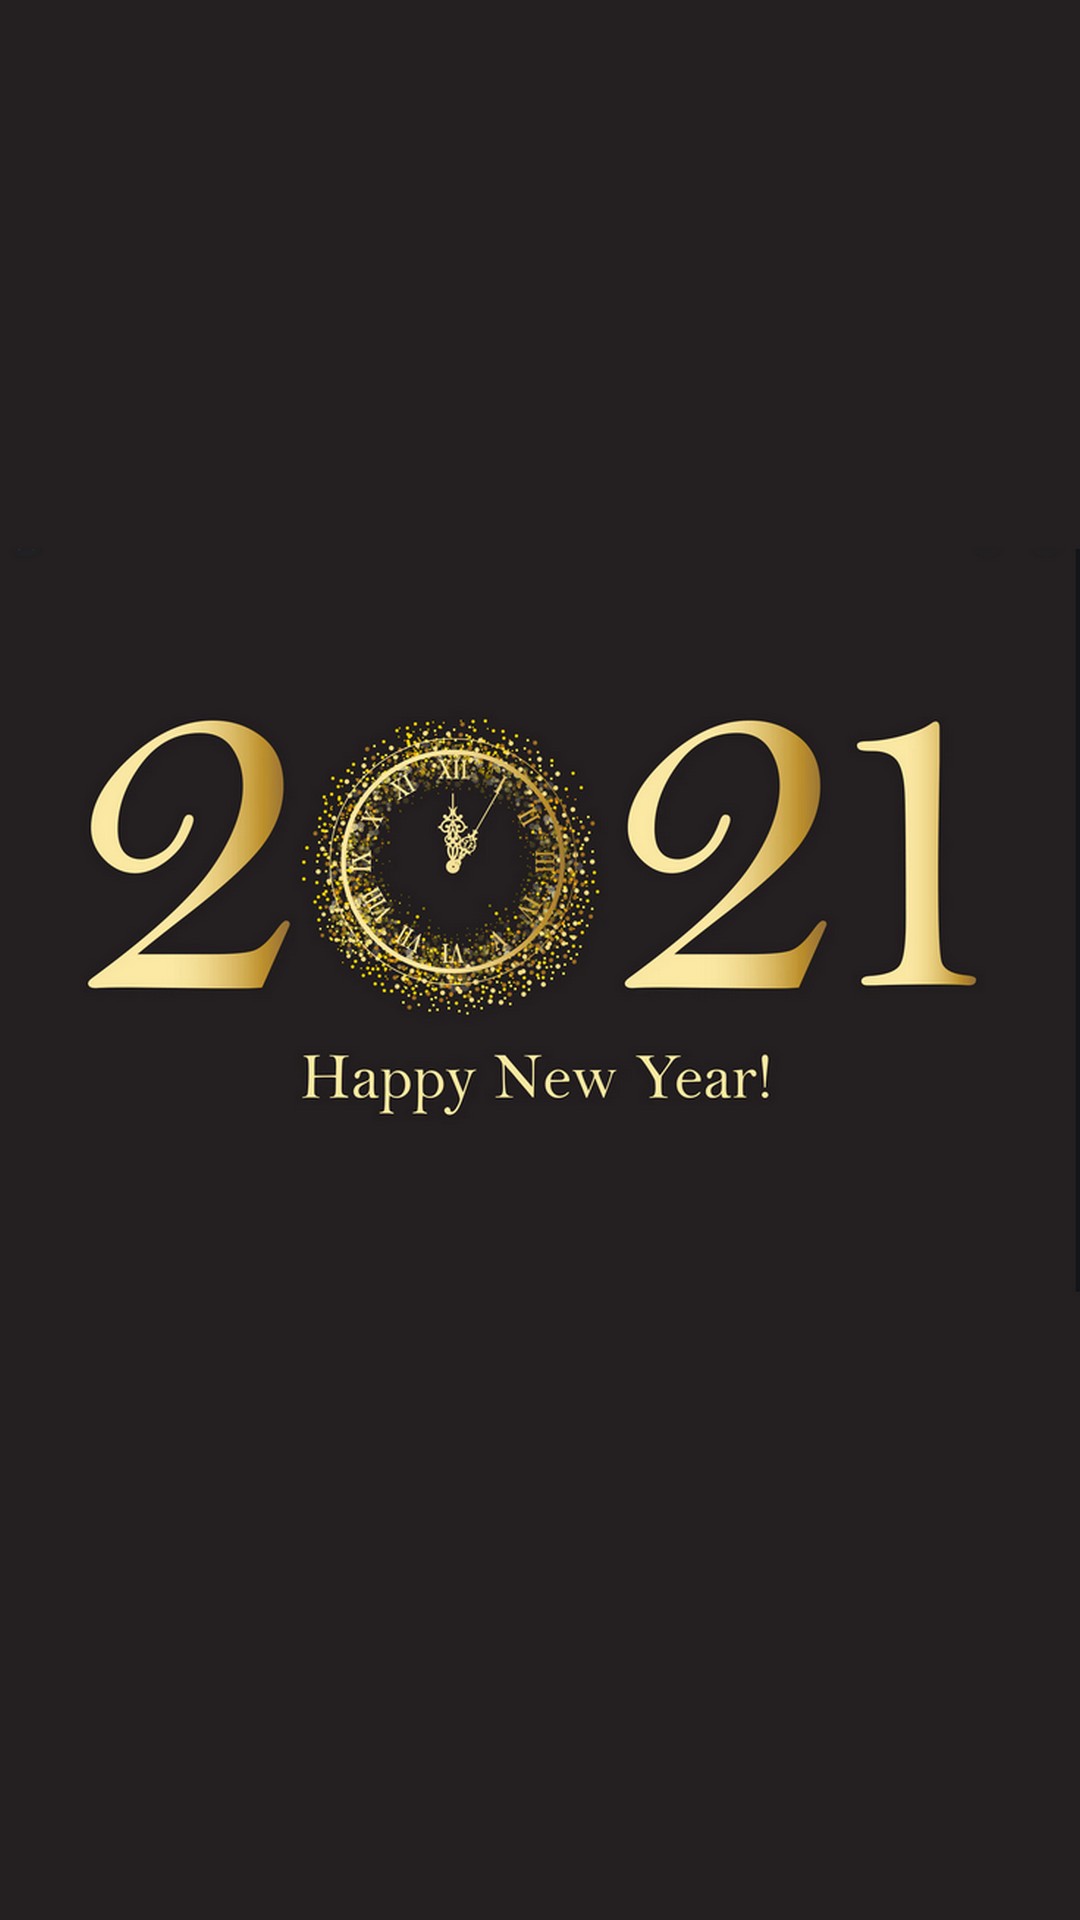 Happy New Year 2021 Wallpaper For Android With high-resolution 1080X1920 pixel. You can use this wallpaper for your Android backgrounds, Tablet, Samsung Screensavers, Mobile Phone Lock Screen and another Smartphones device